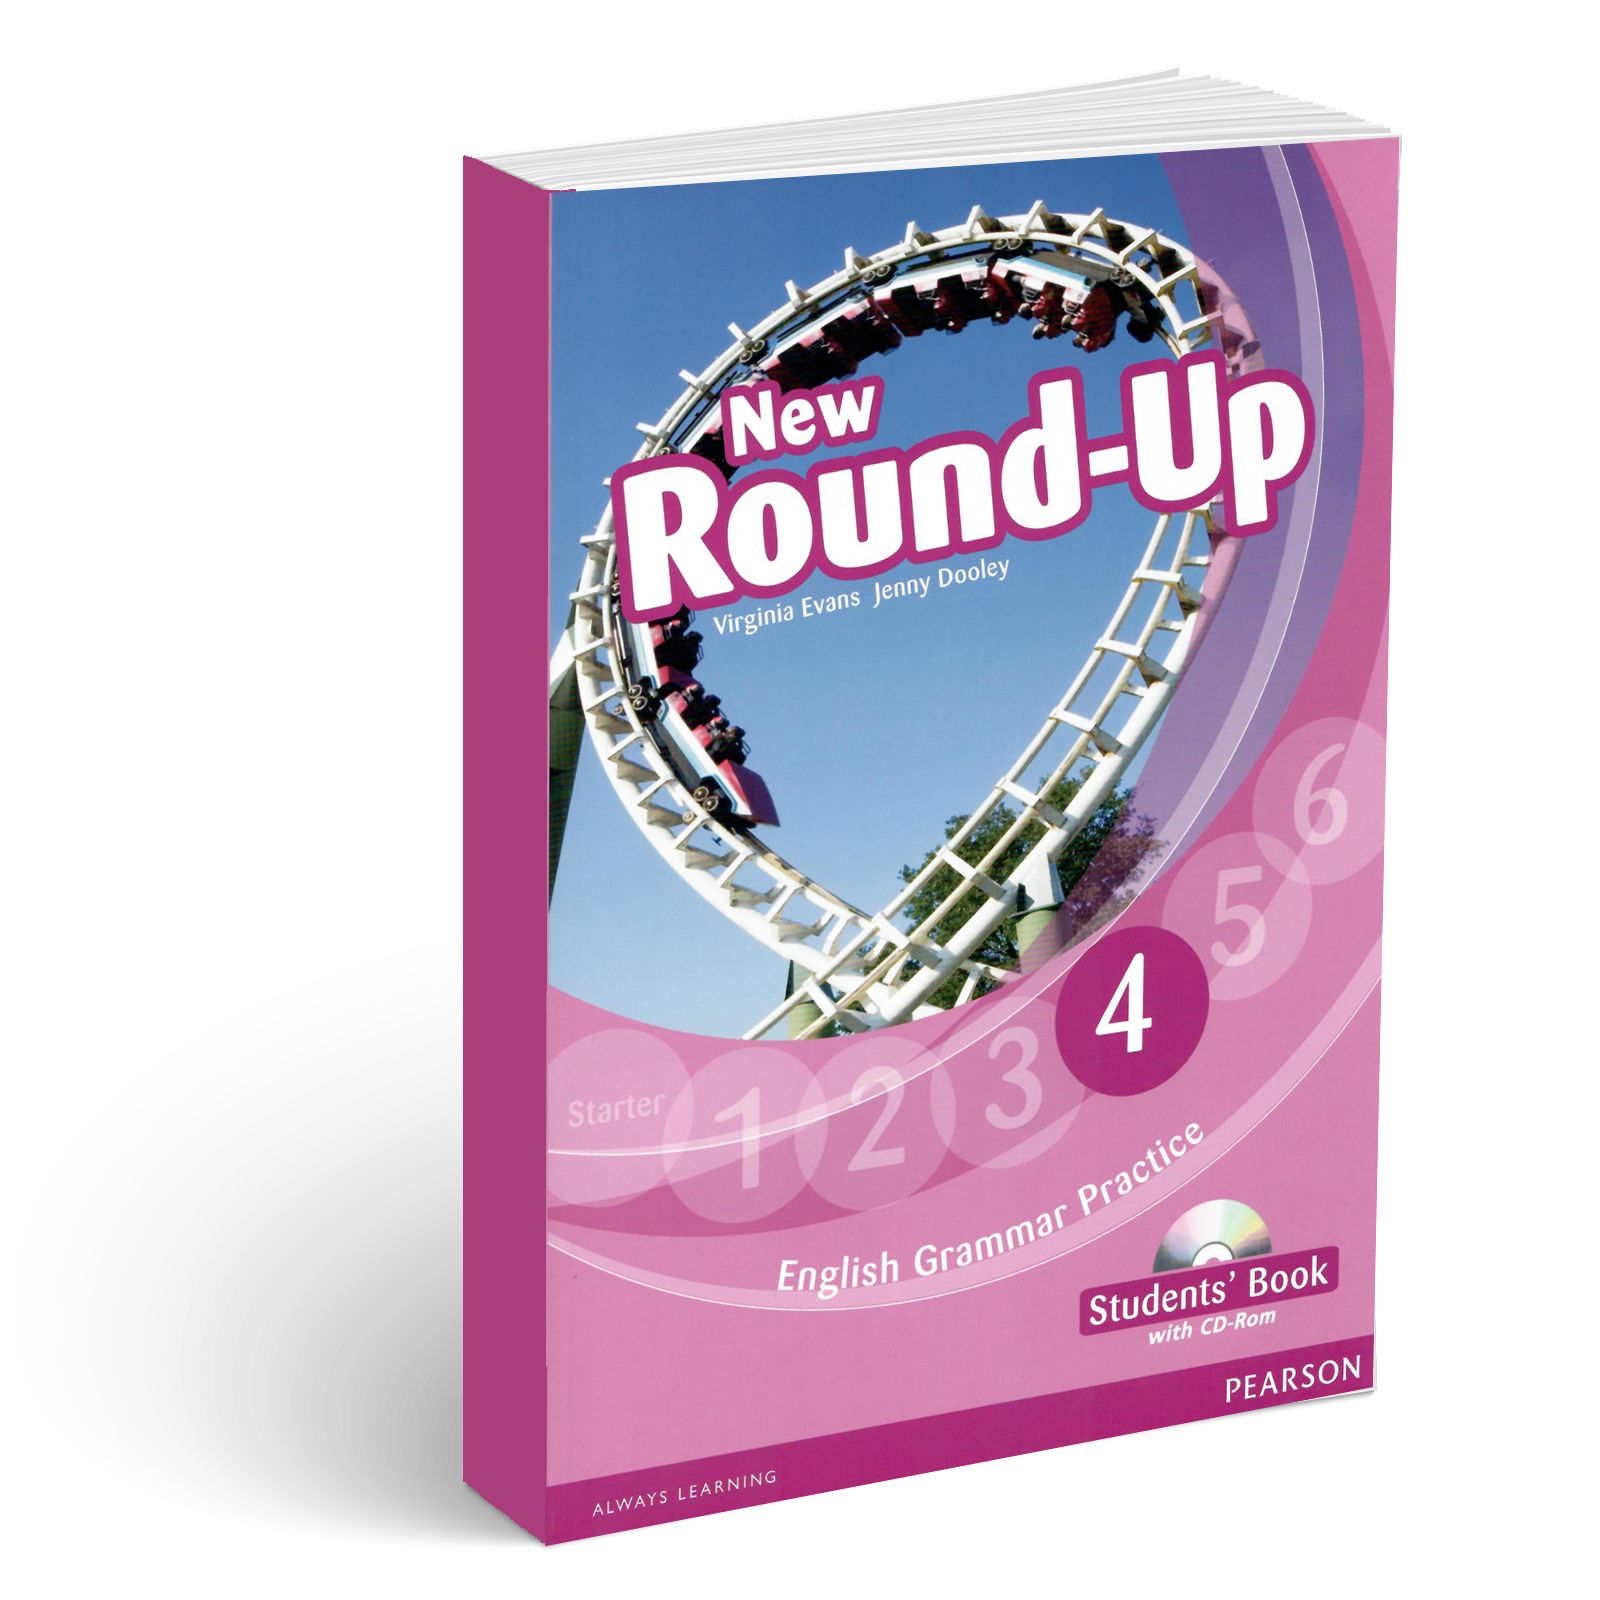 New Round-up от Pearson. Round up 4. Английский New Round up Starter. New round 4 students book